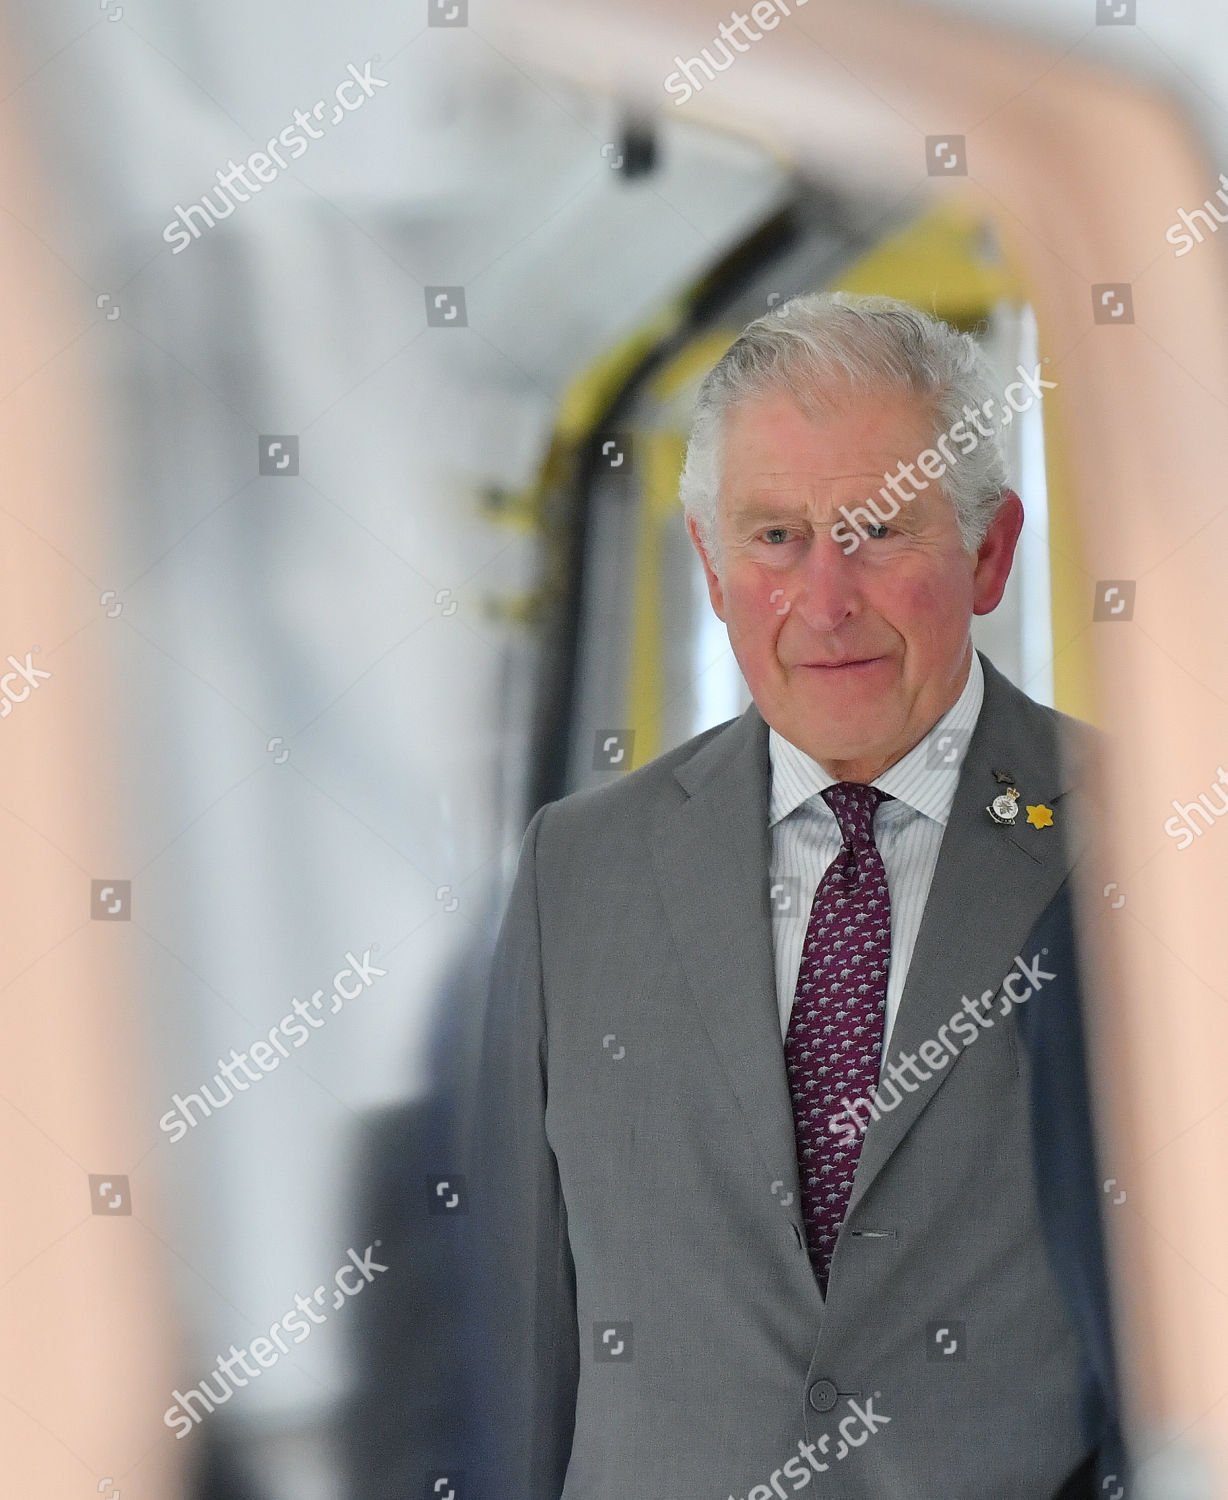 prince-charles-visit-to-south-wales-uk-shutterstock-editorial-10563131o.jpg